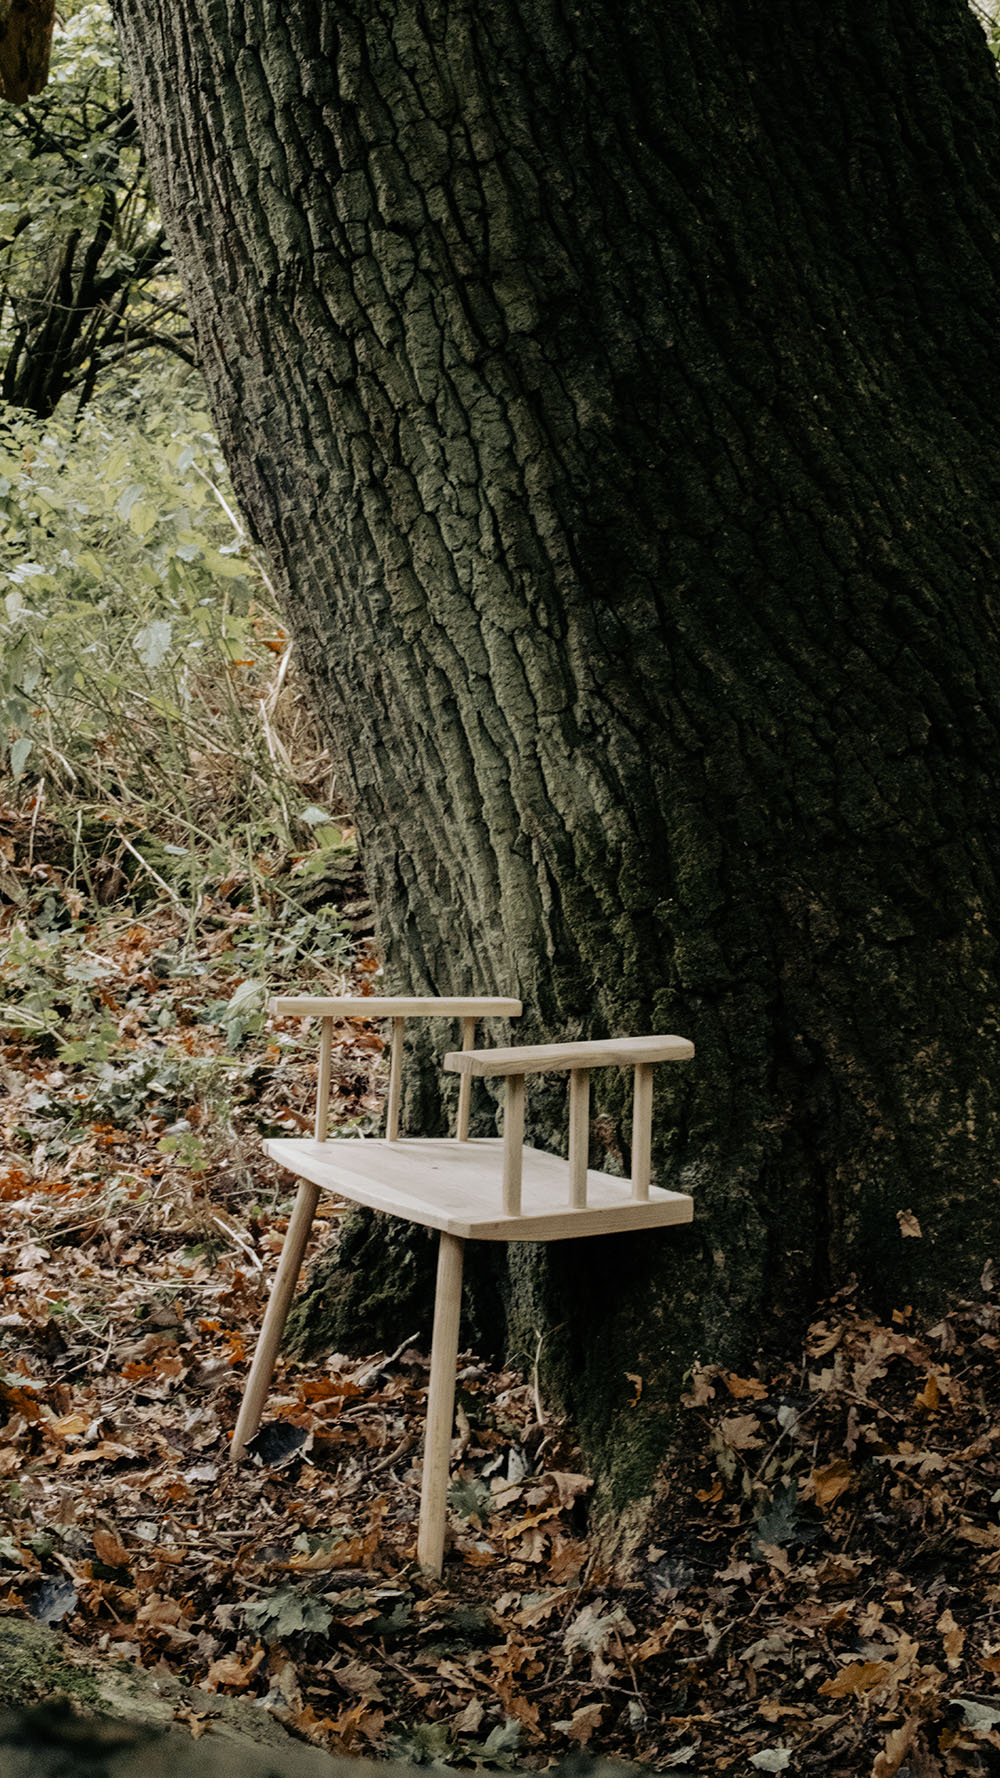 A two-legged chair leaning against a tree in a forest